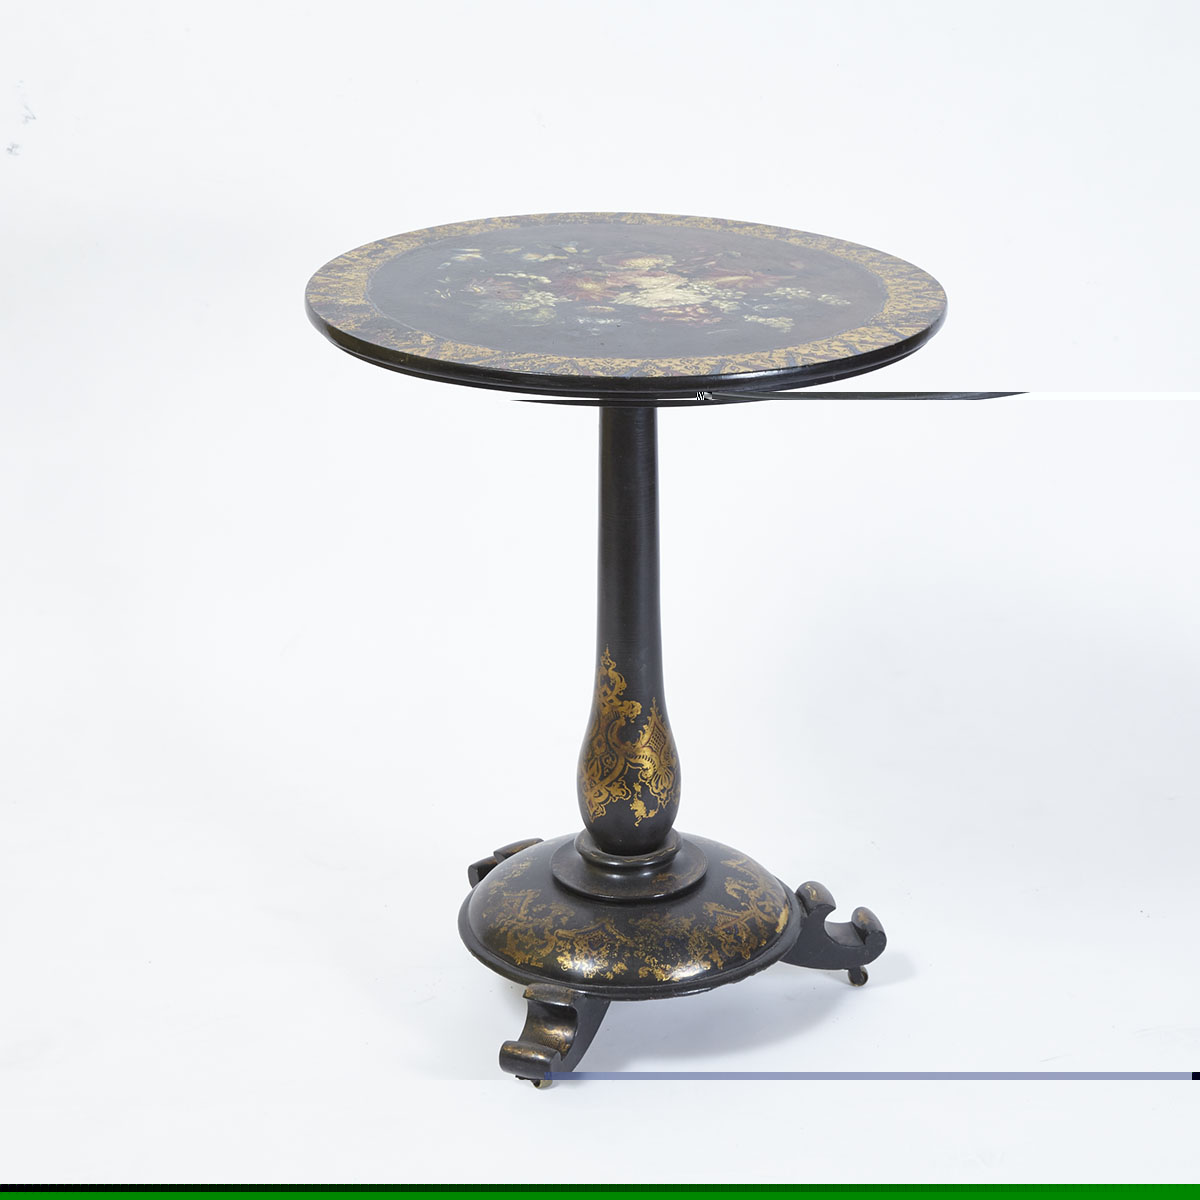 Victorian Ebonized Hand Painted Tilt Top Occasional Table, 2nd Half, 19th century